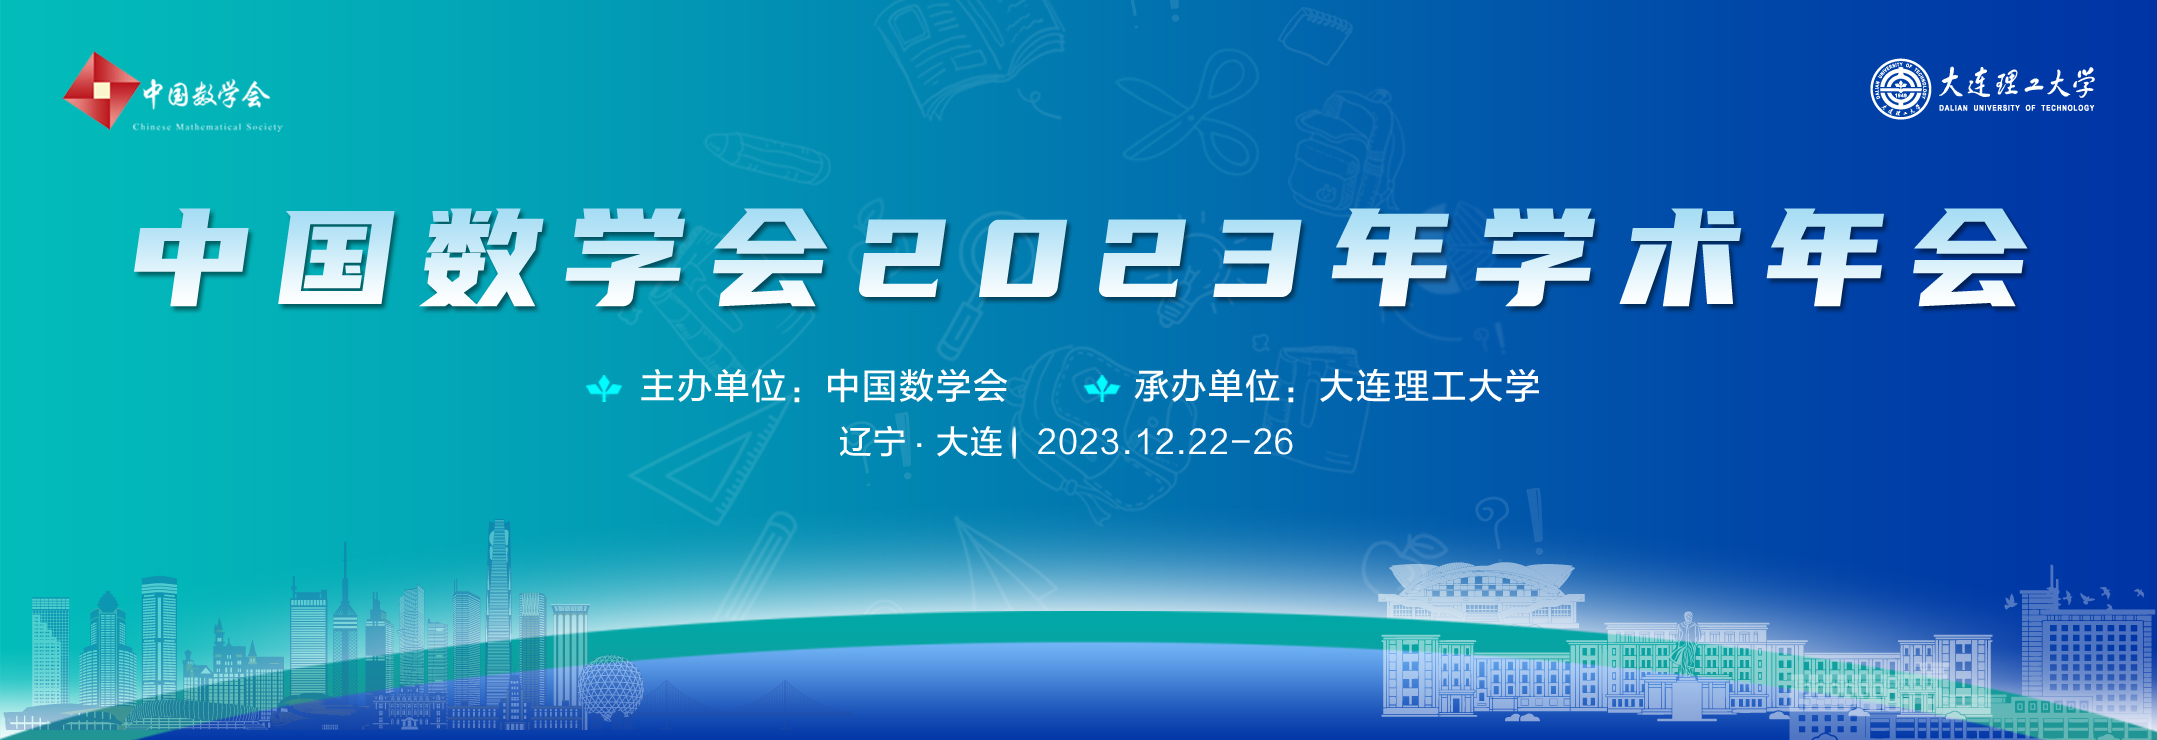 Chinese Mathematical Society 2023 Annual Conference